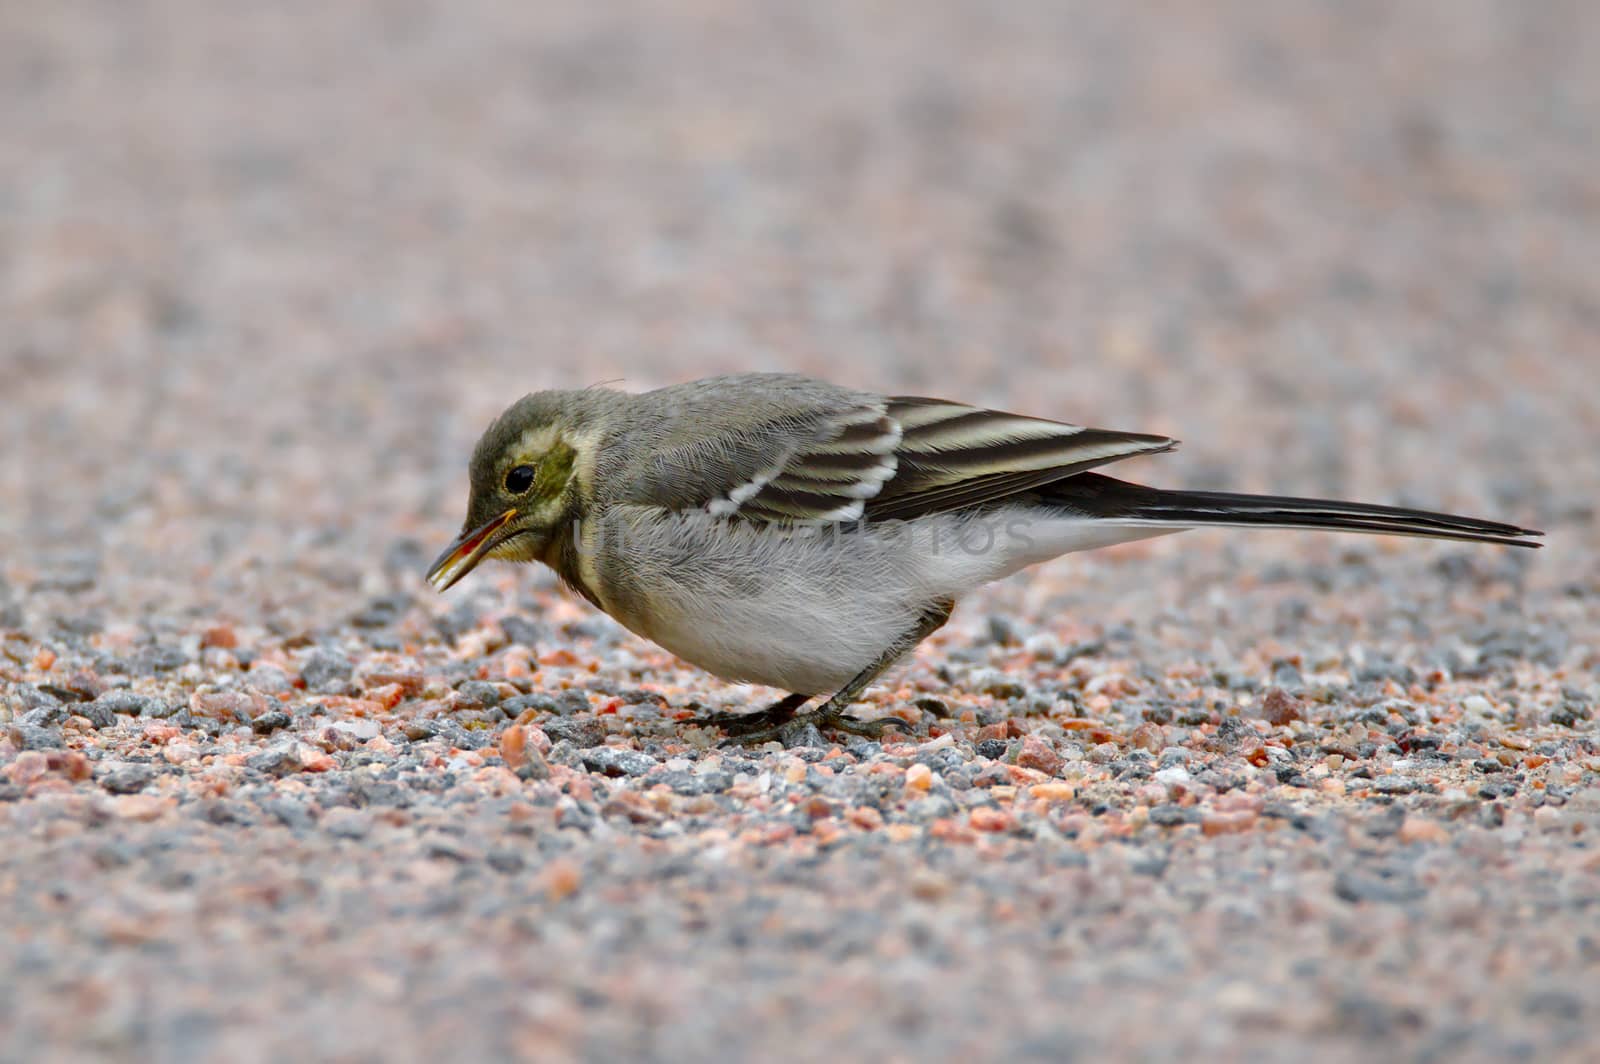 Small bird looking for food on the gravel sidewalk in urban area.